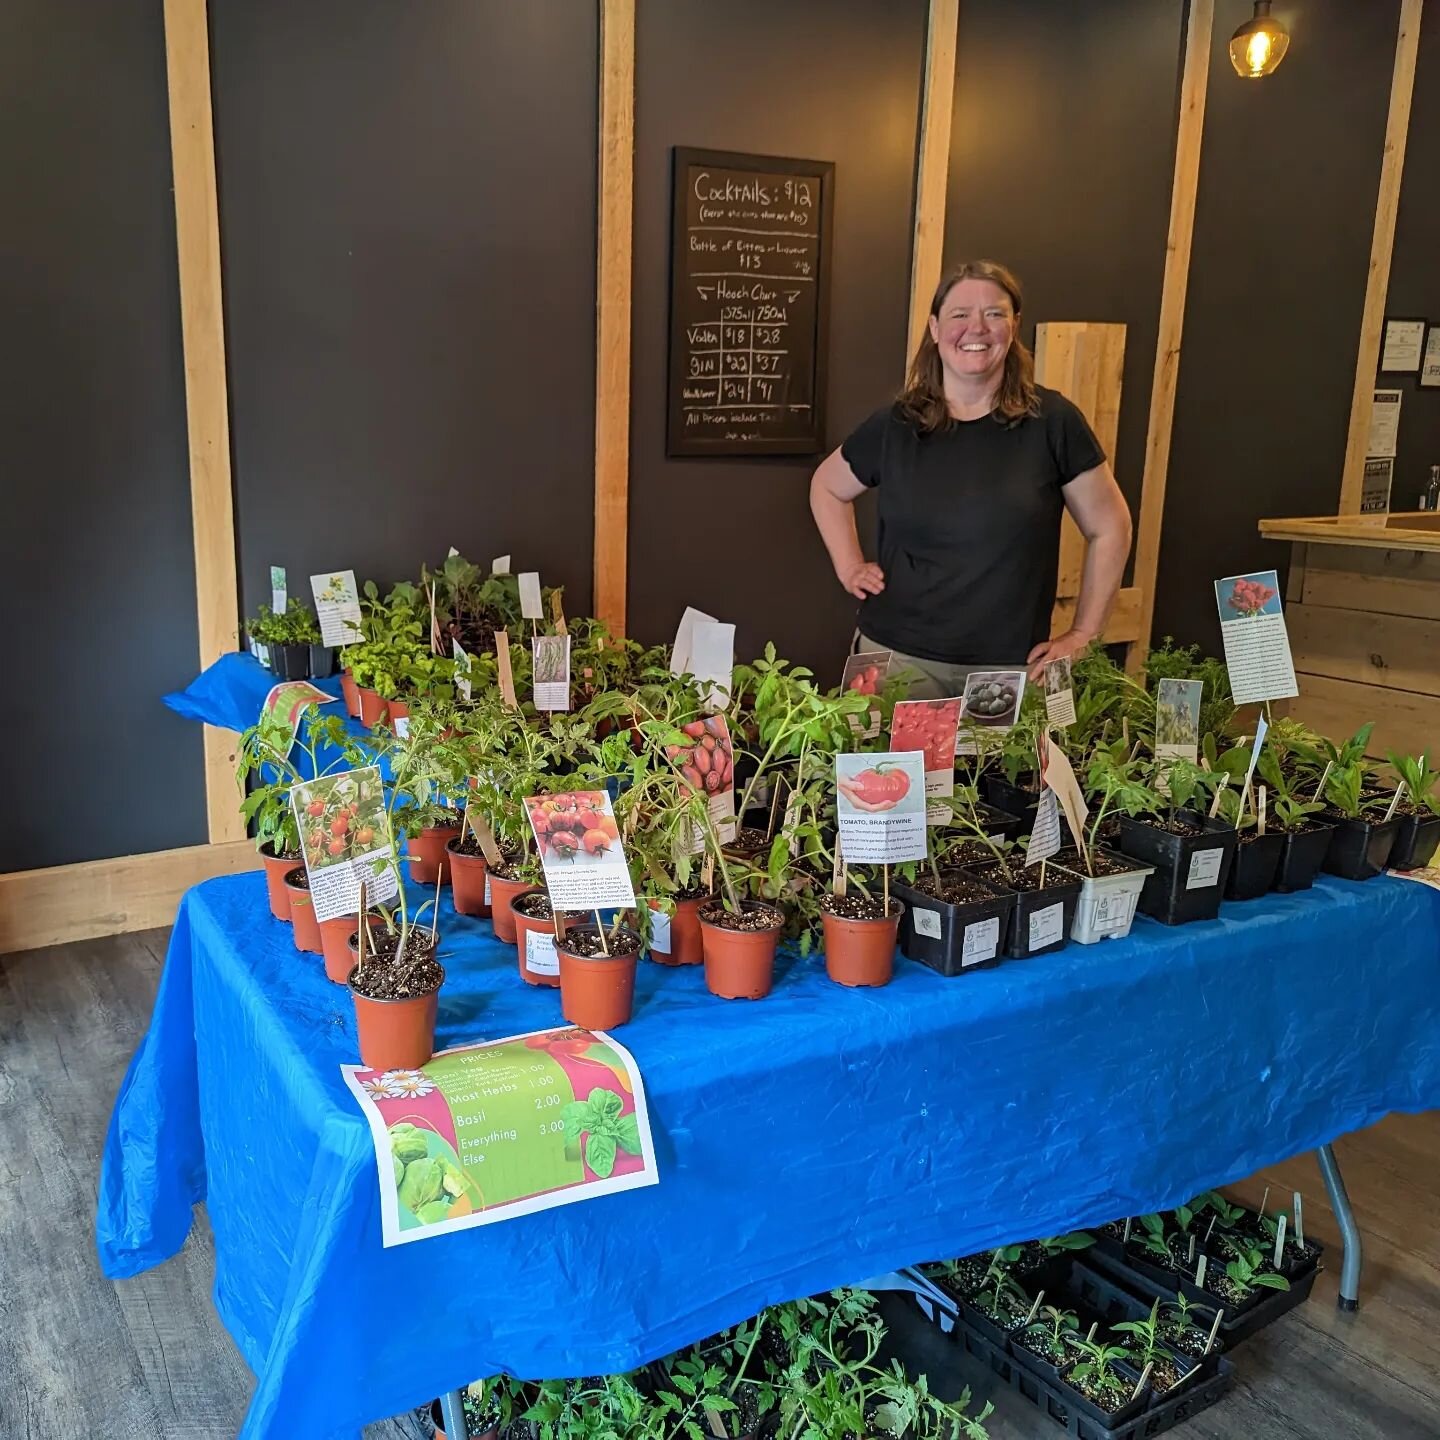 Come see us at @still_mill_distillery until 2 pm for plants galore!